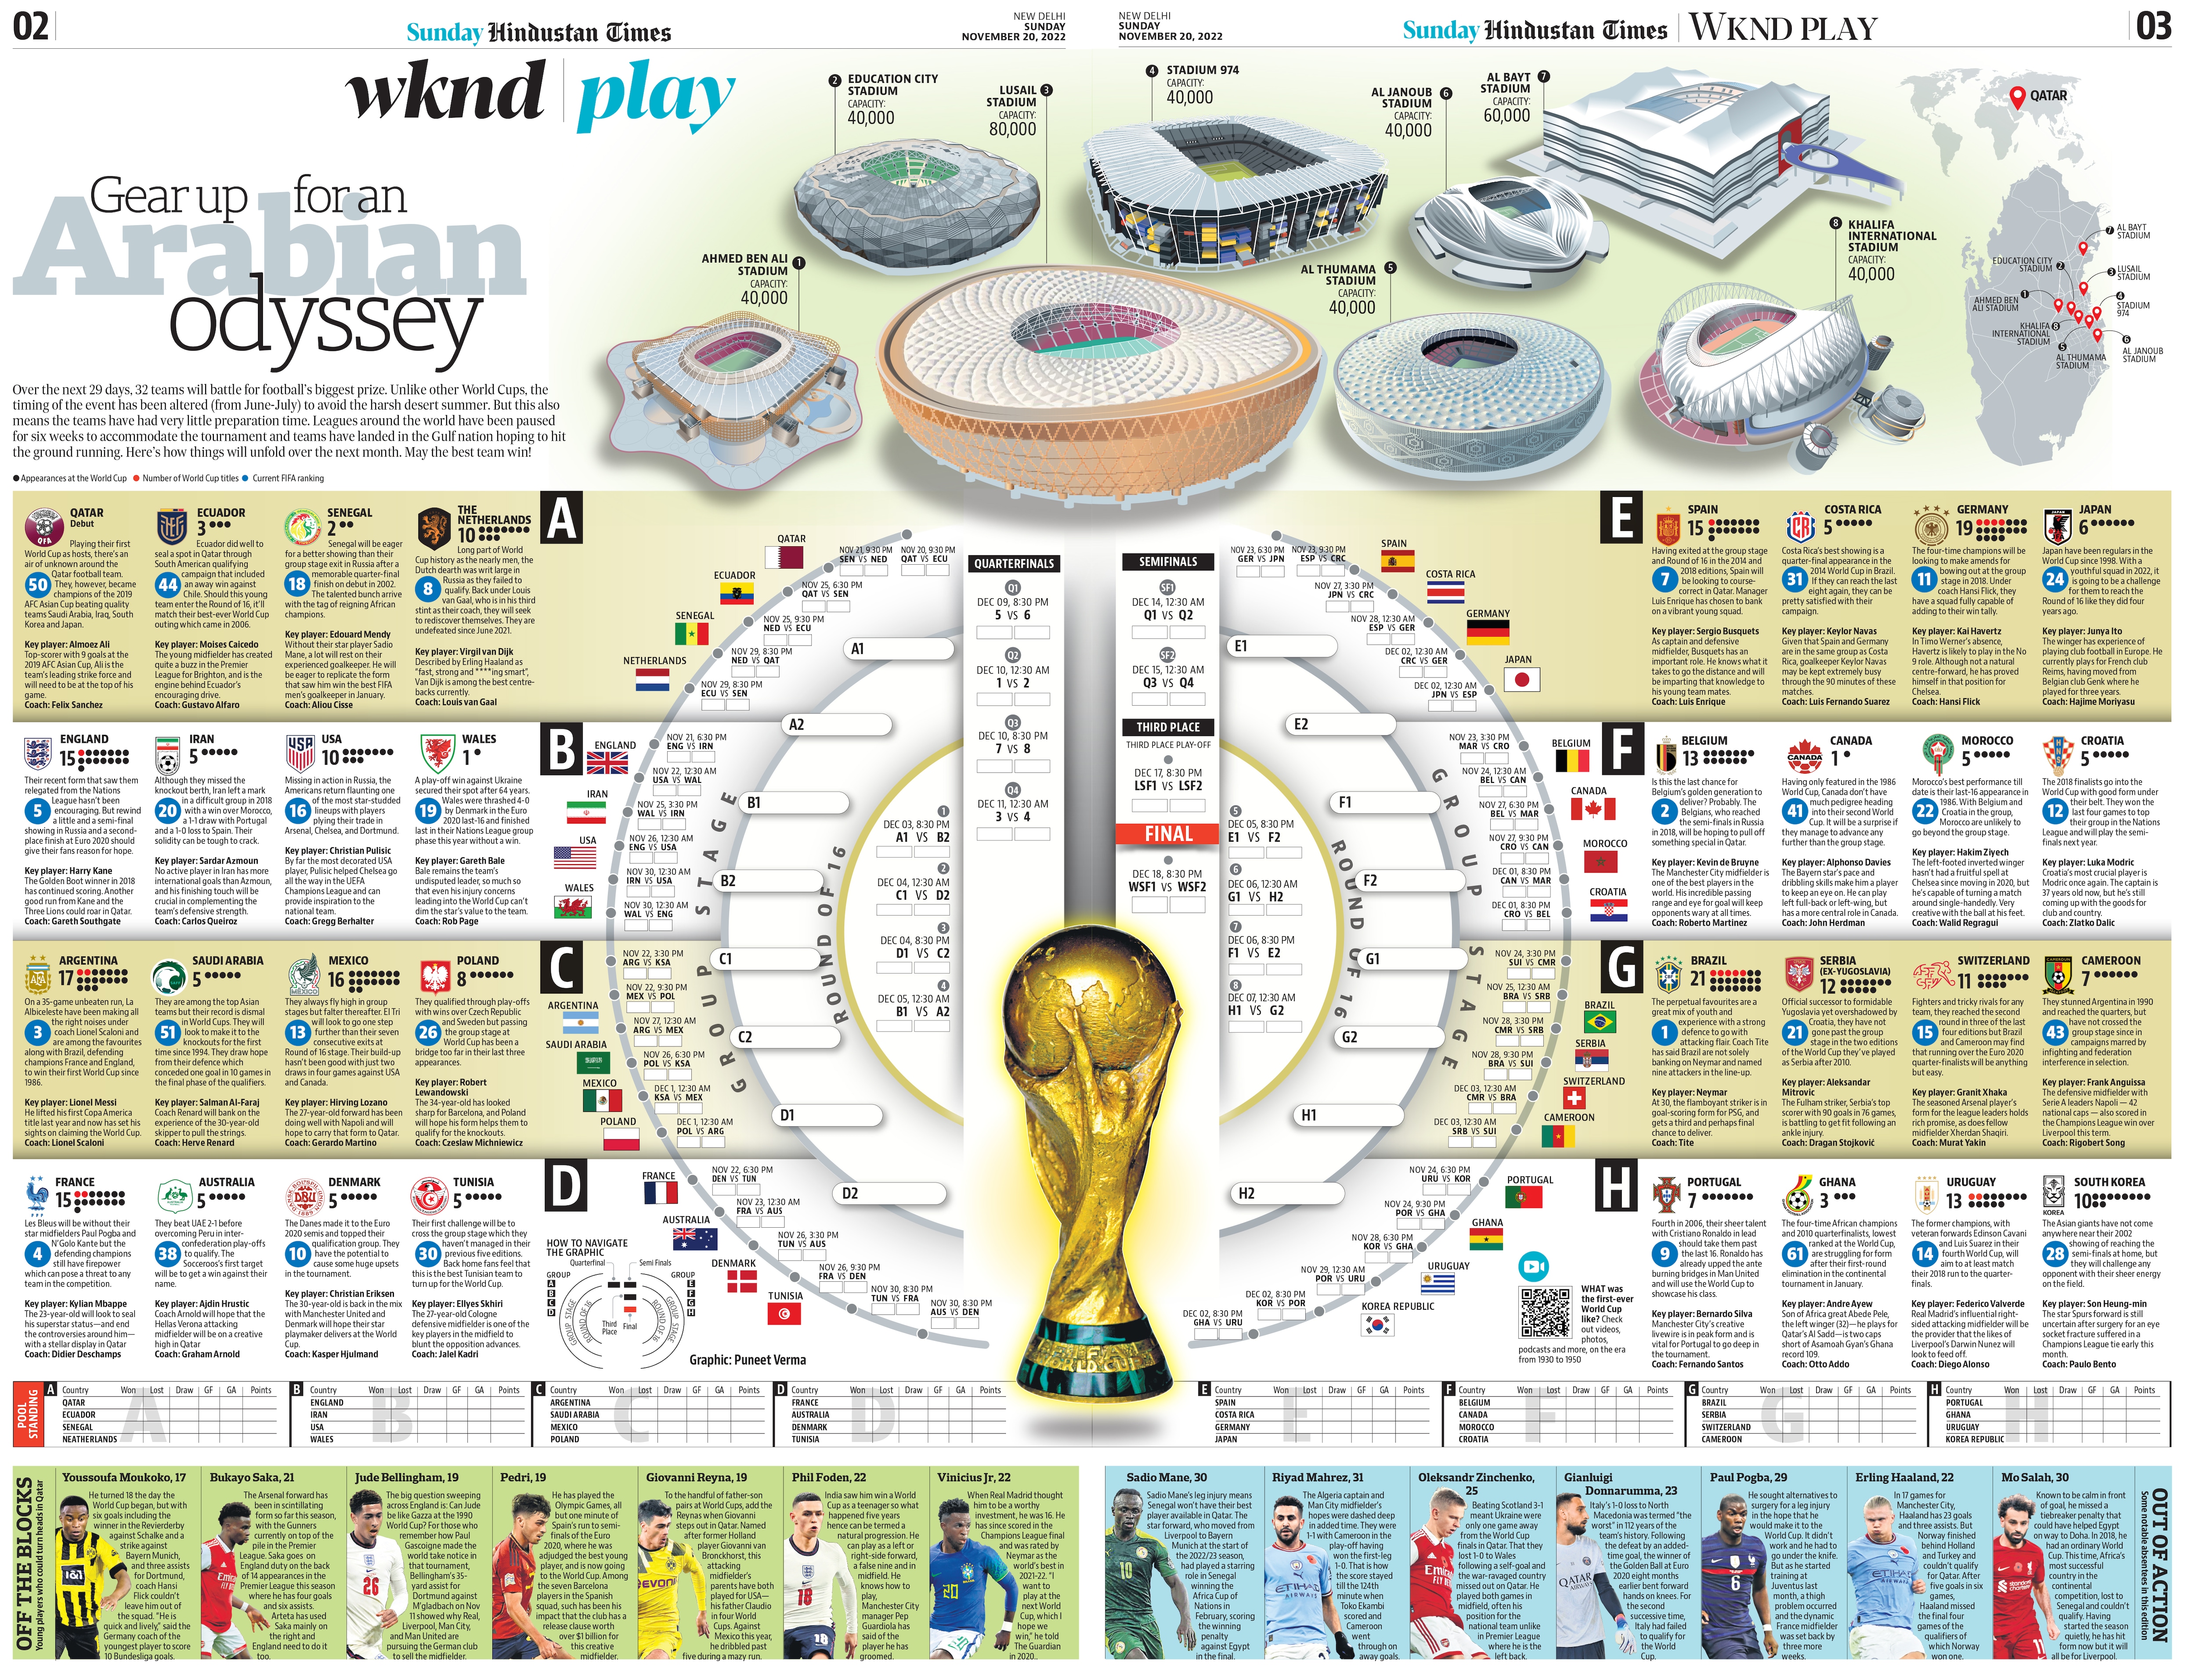 FIFA WC guide History, groups, players to watch out for - All you need to know Football News